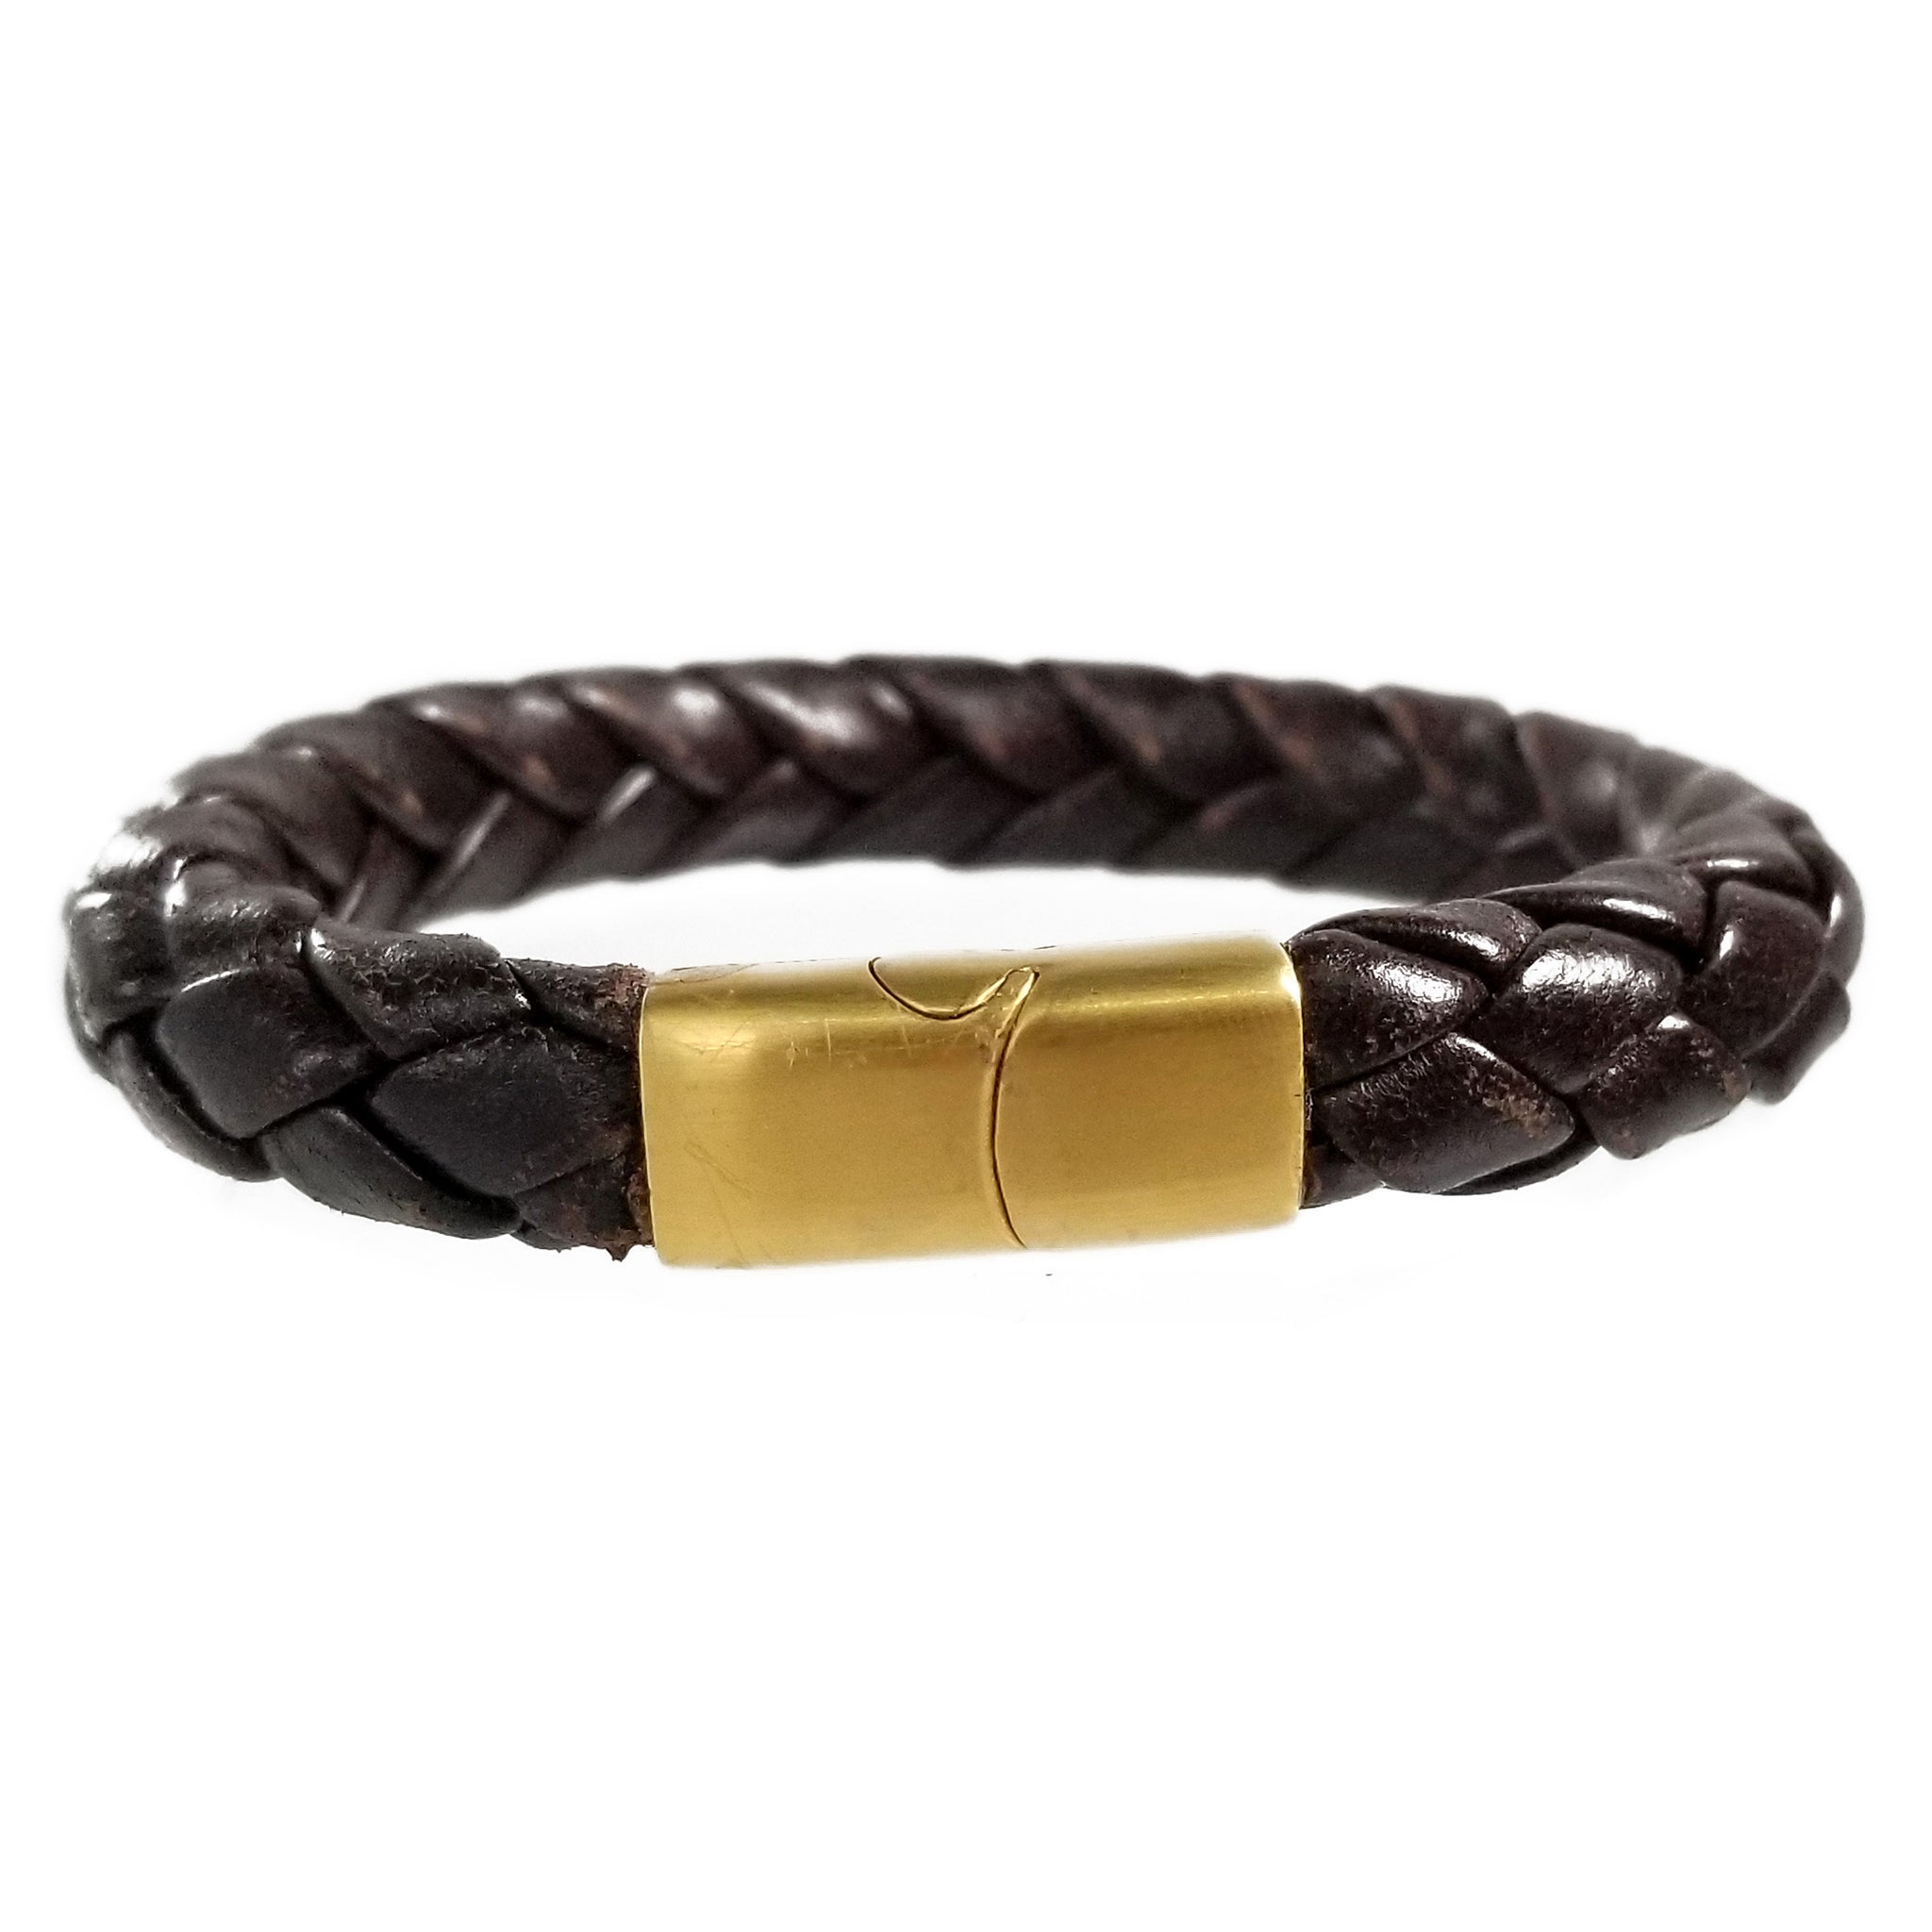 Braided Genuine Leather Bracelet Men with Stainless Steel Buckle